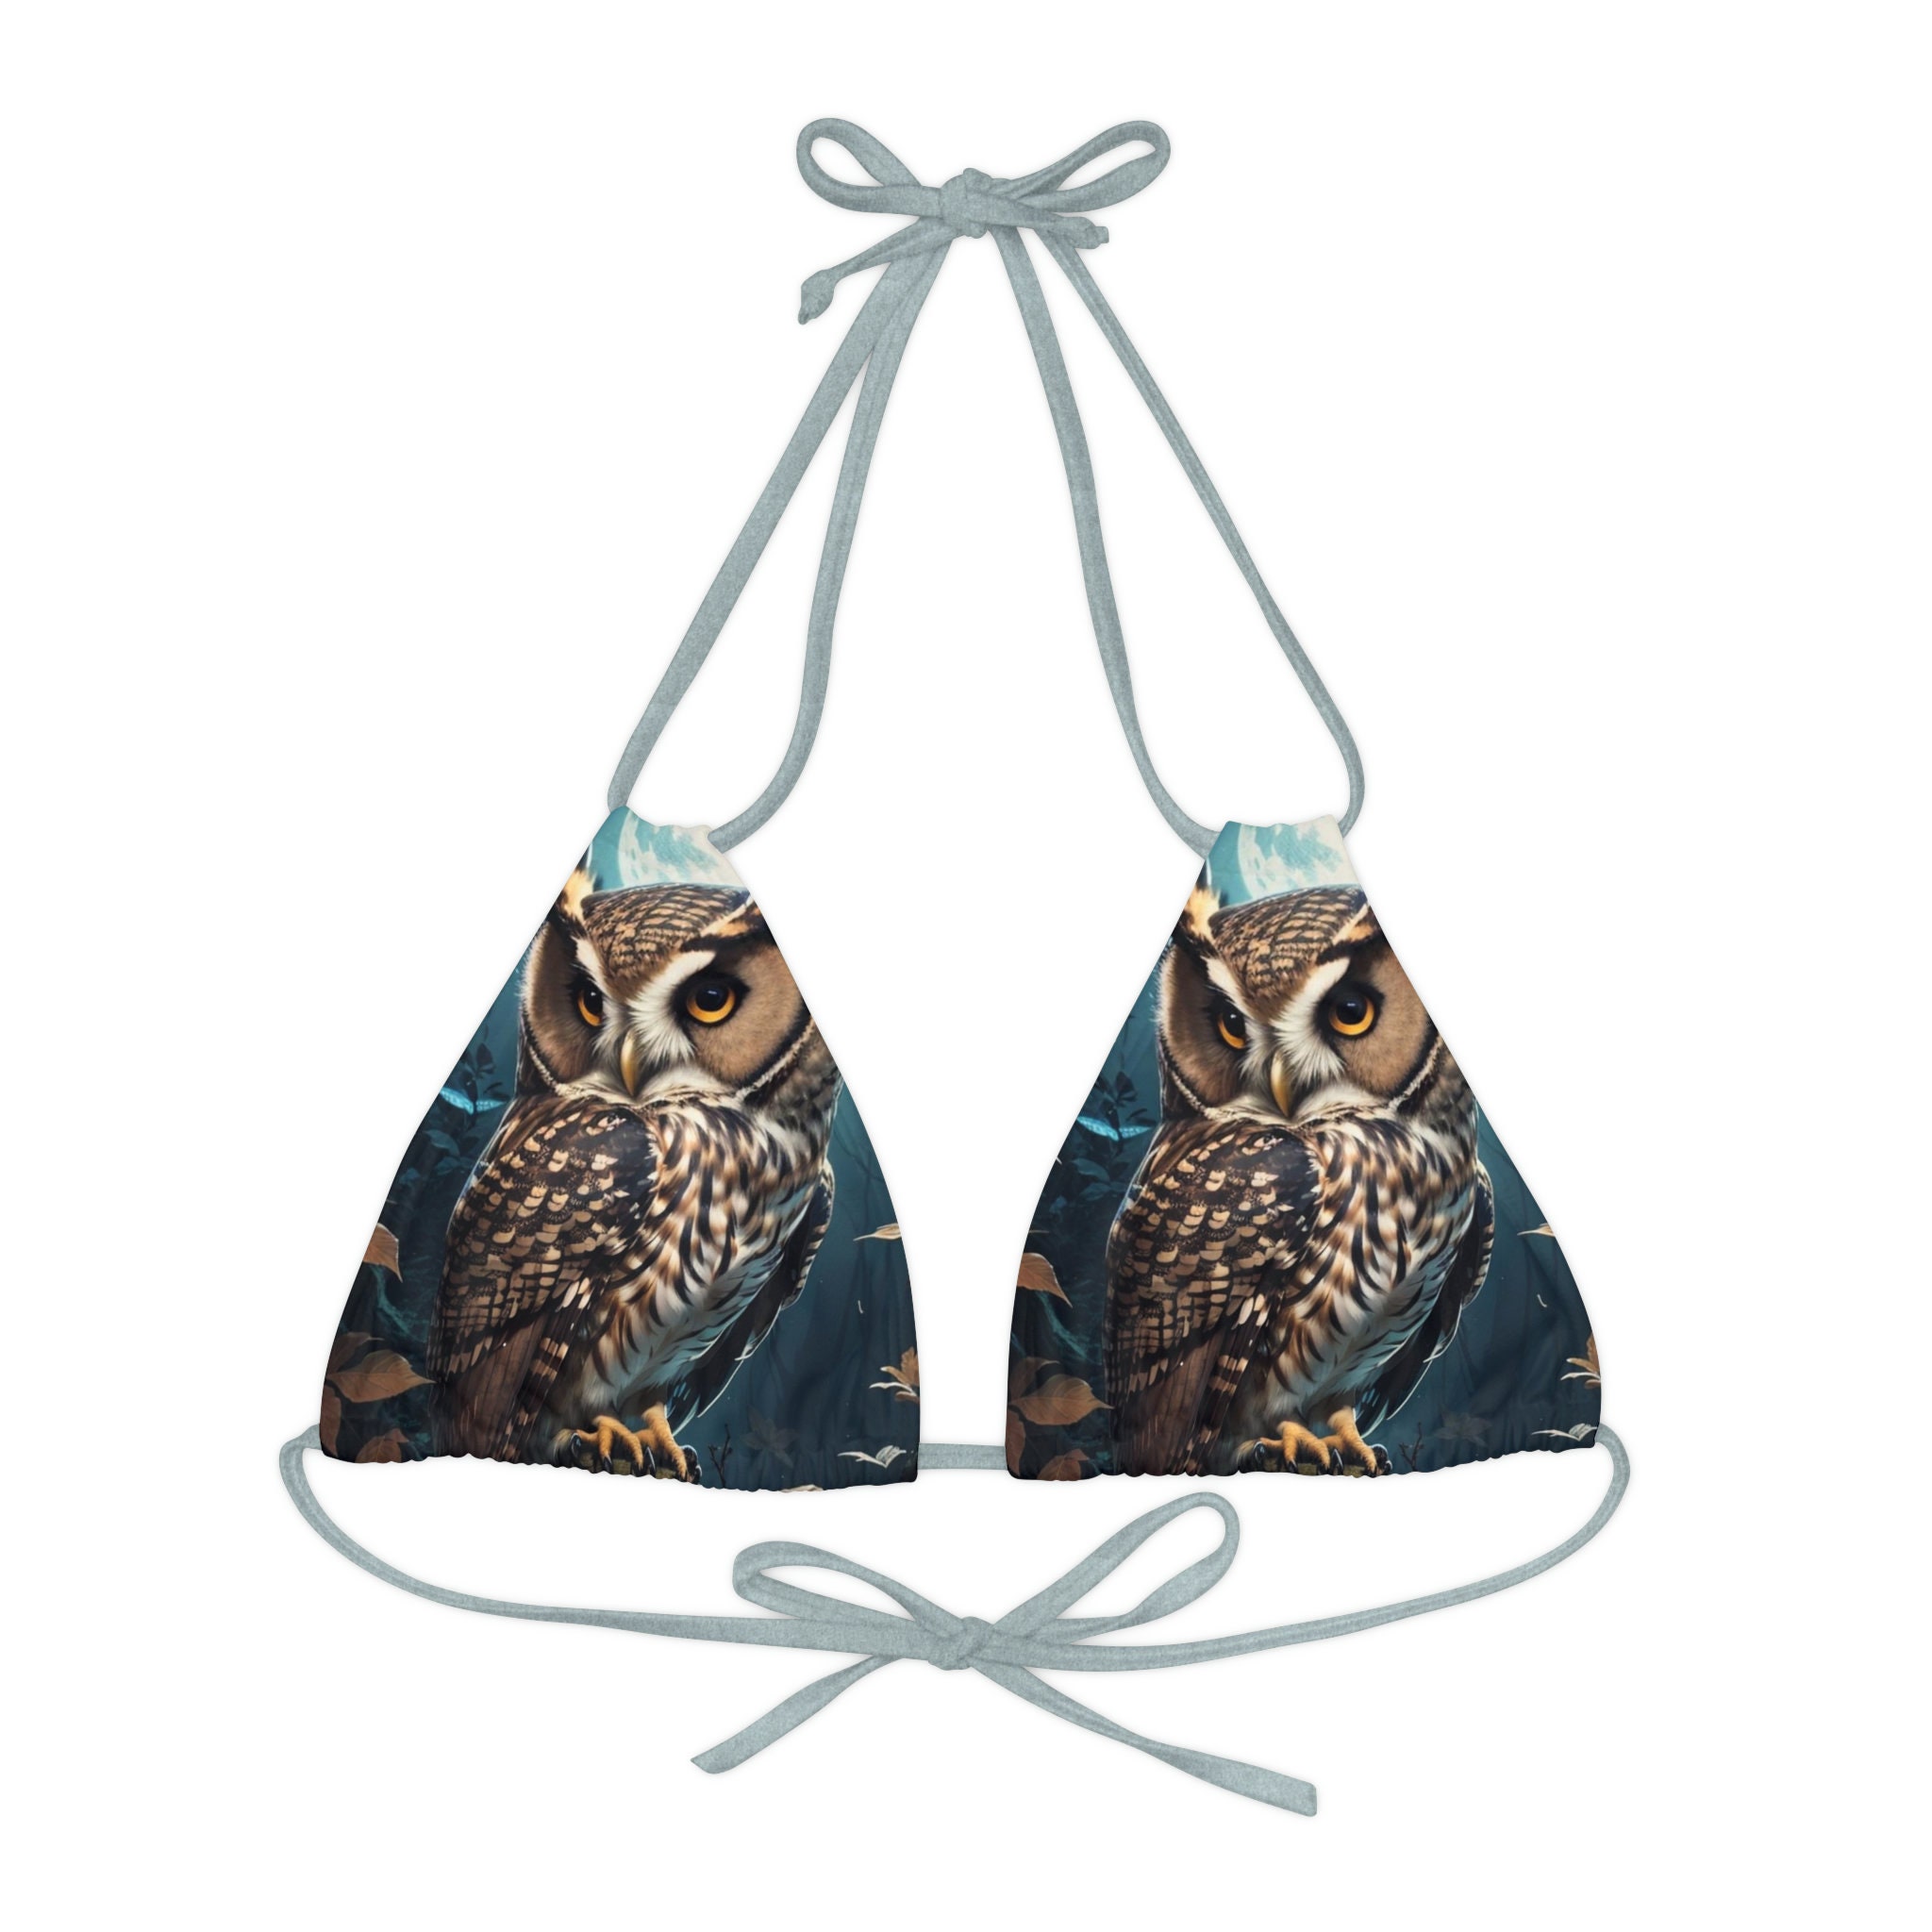 Dellukee Everyday Womens Underwear for Any Outfit Cartoon Owls